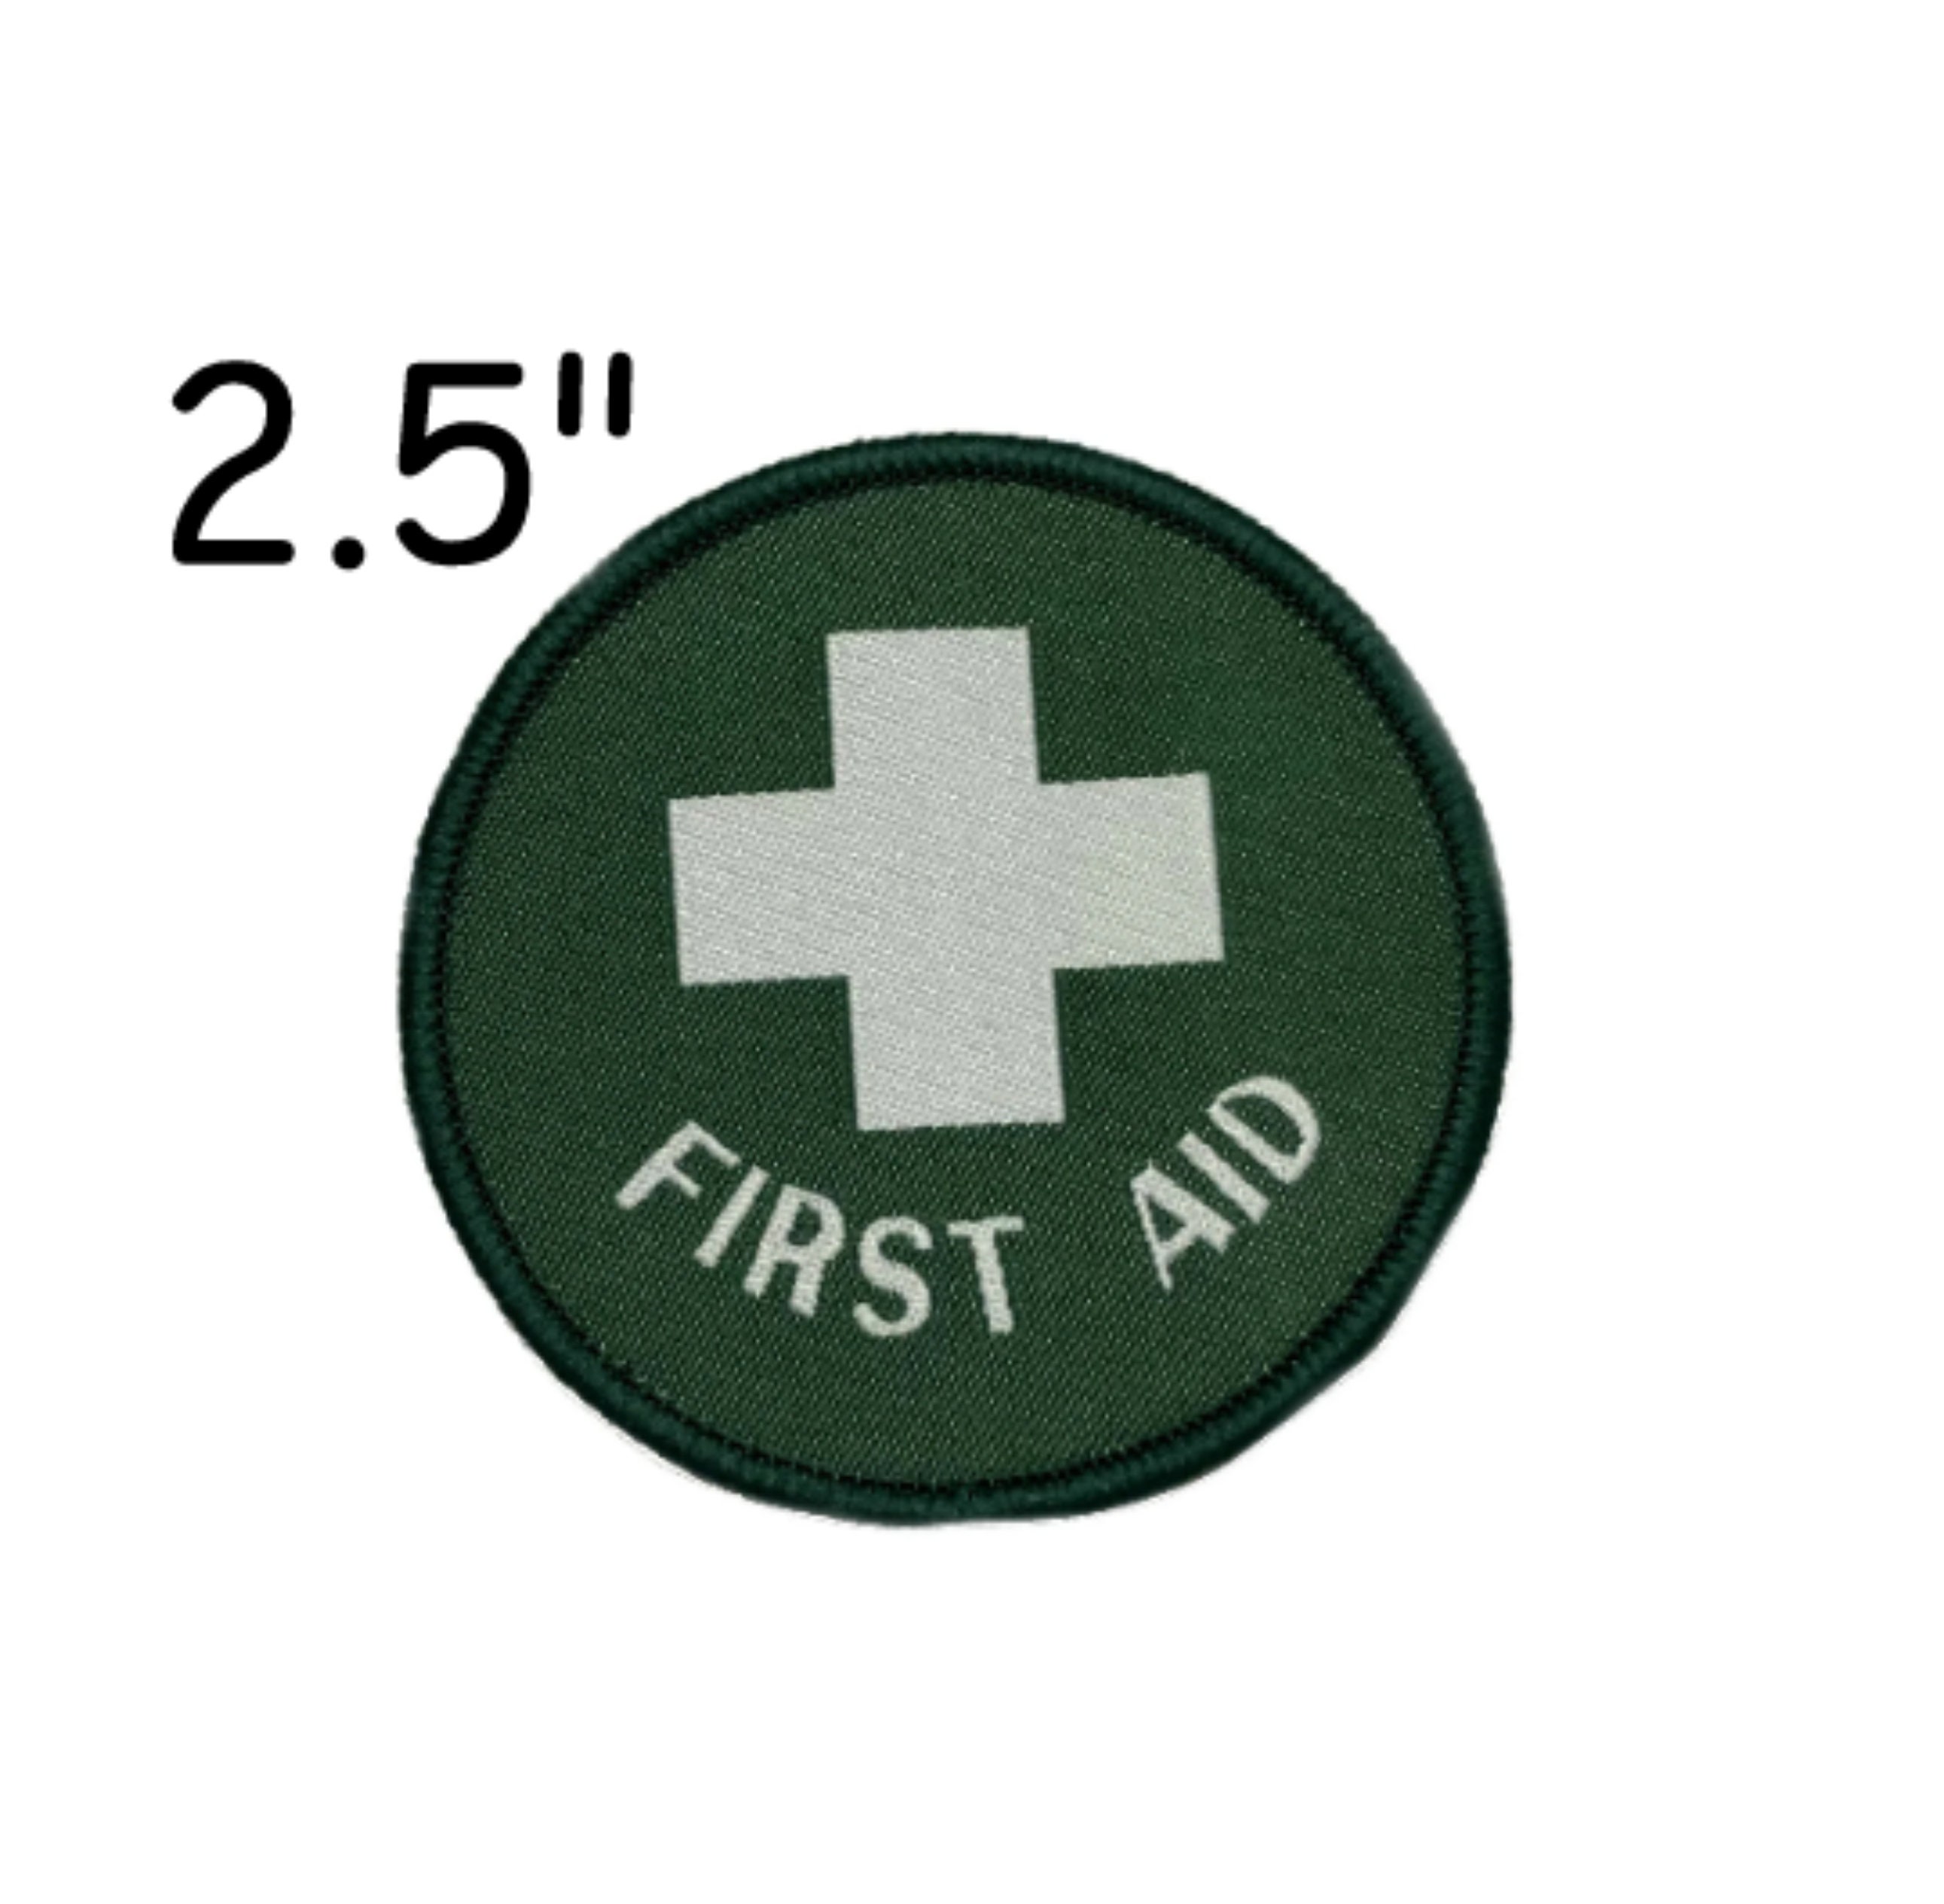 First Aid AED CPR Trained Patch (3 Inch) Embroidered Iron or Sew on Badge  DIY Applique Bag Jacket Shirt